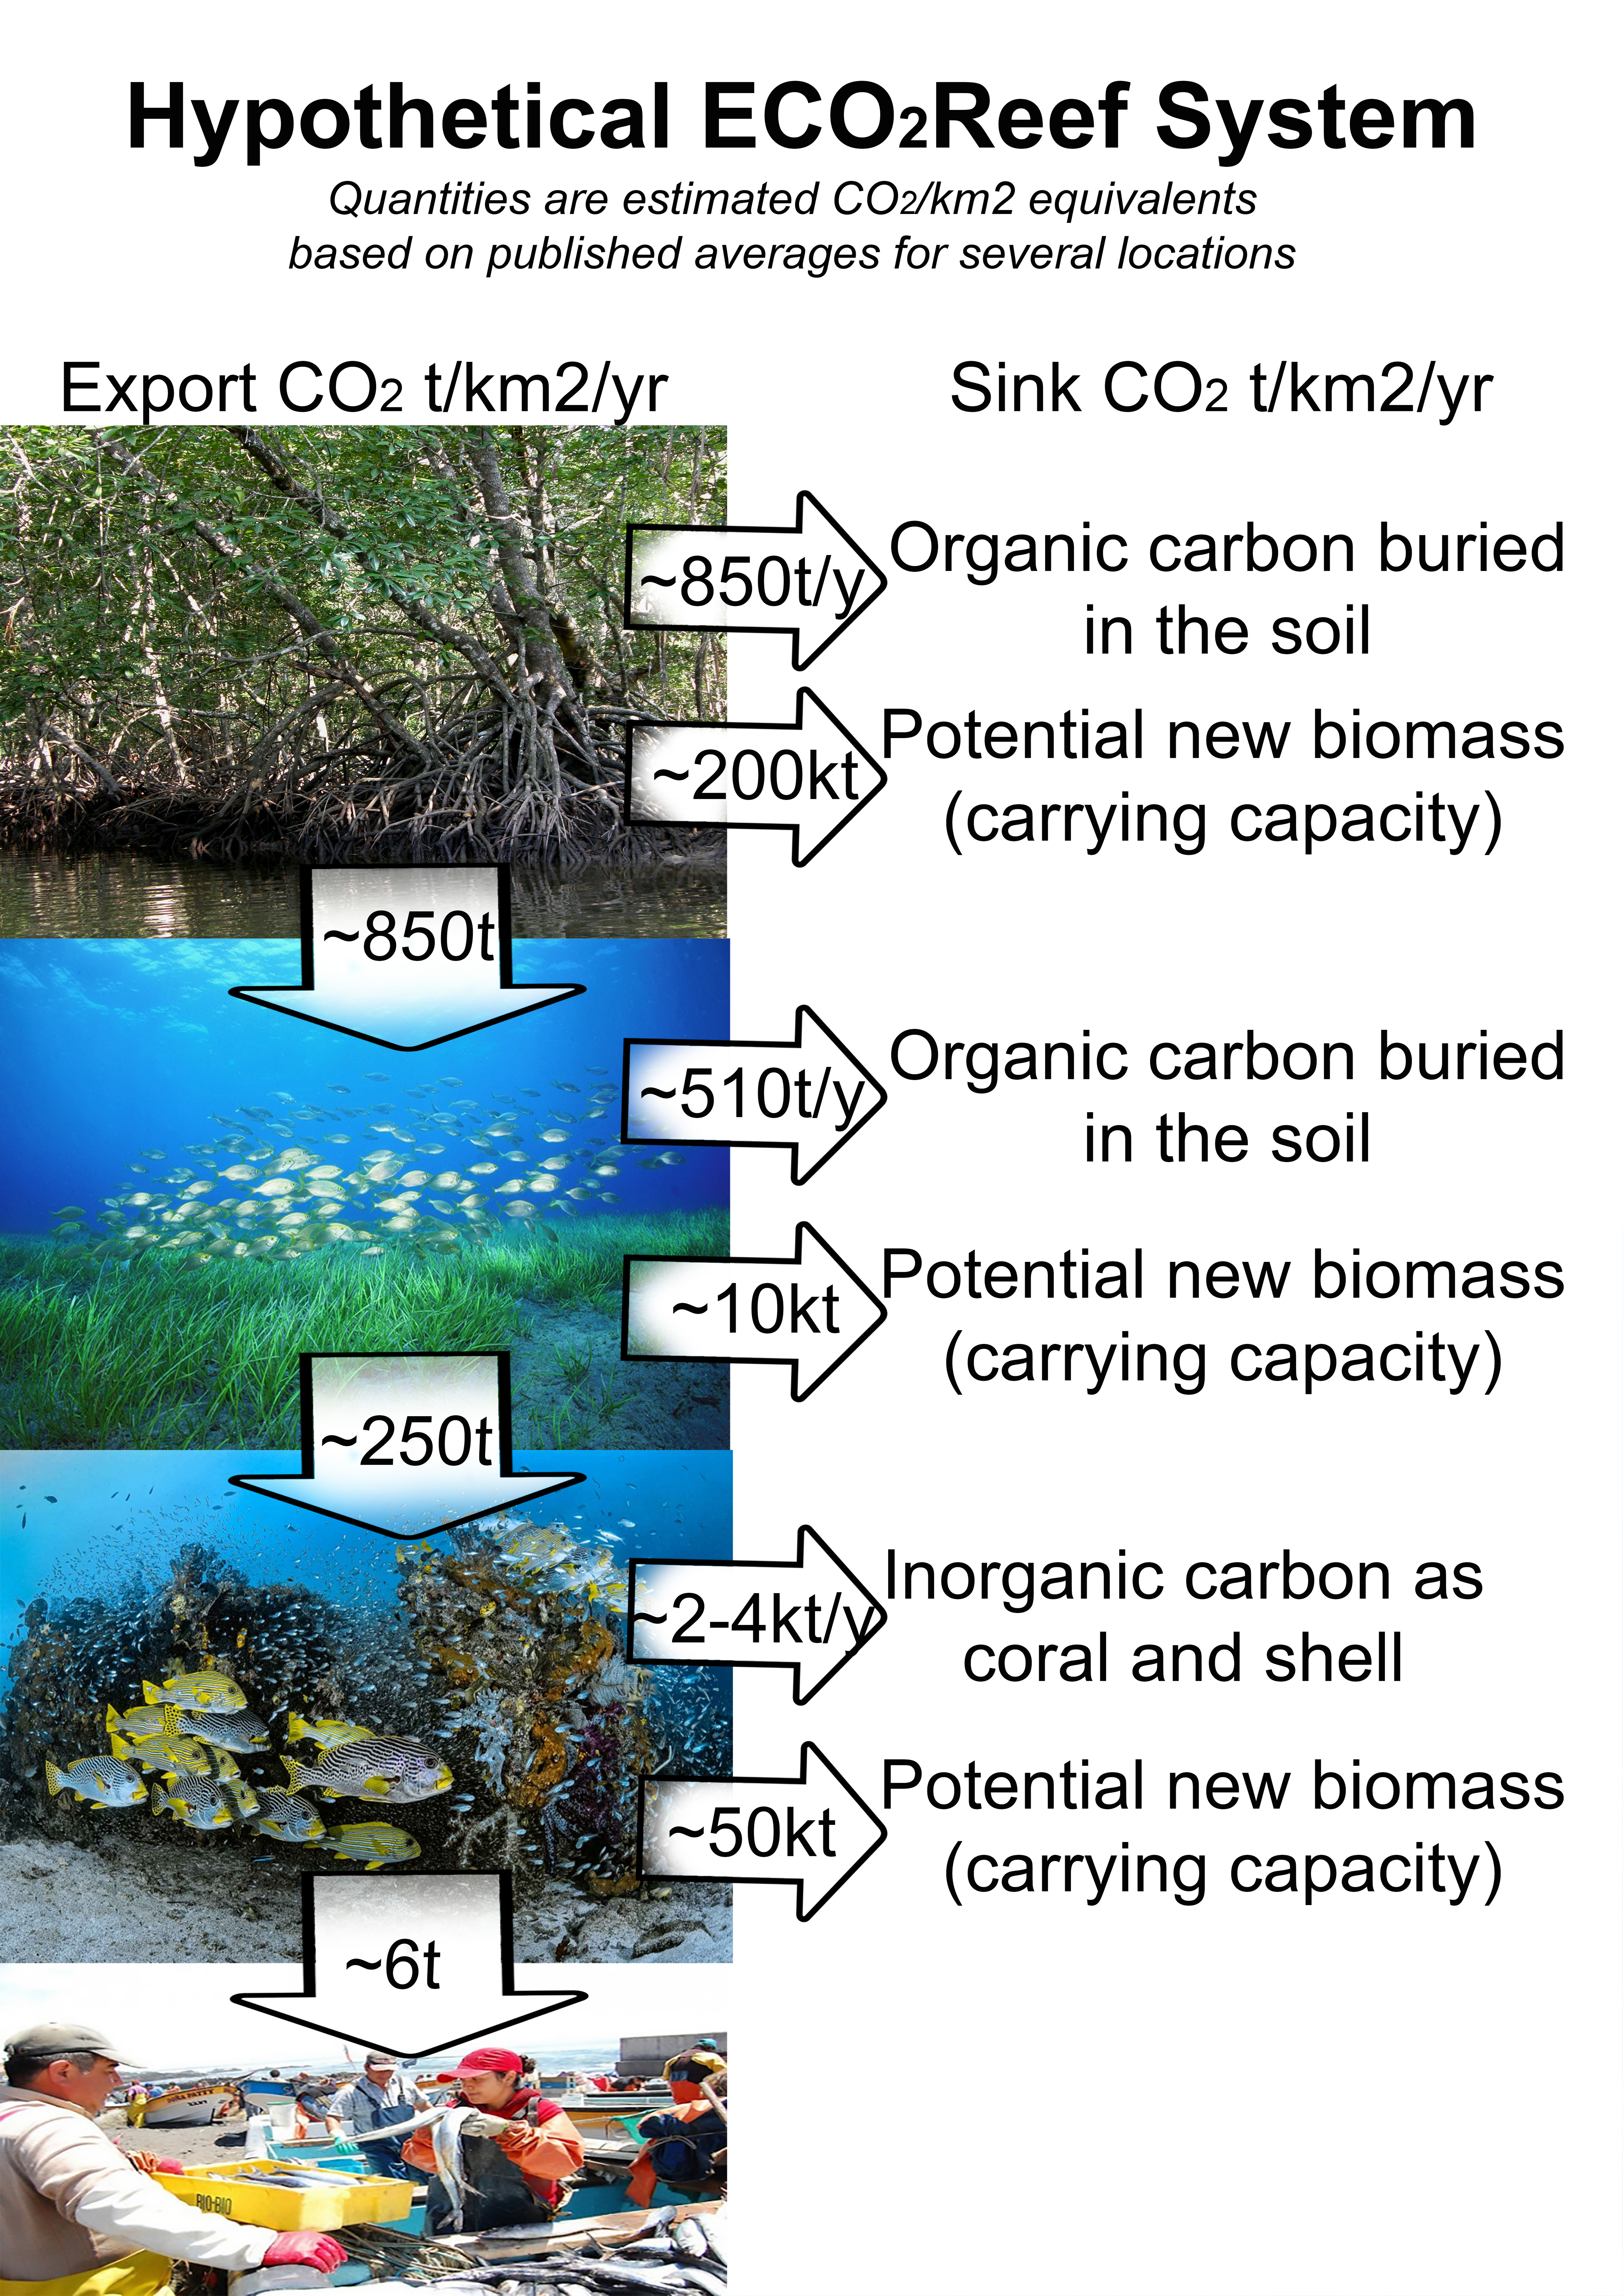 Hypothetical ECO-Reef Flow Diagram carbon offset removed